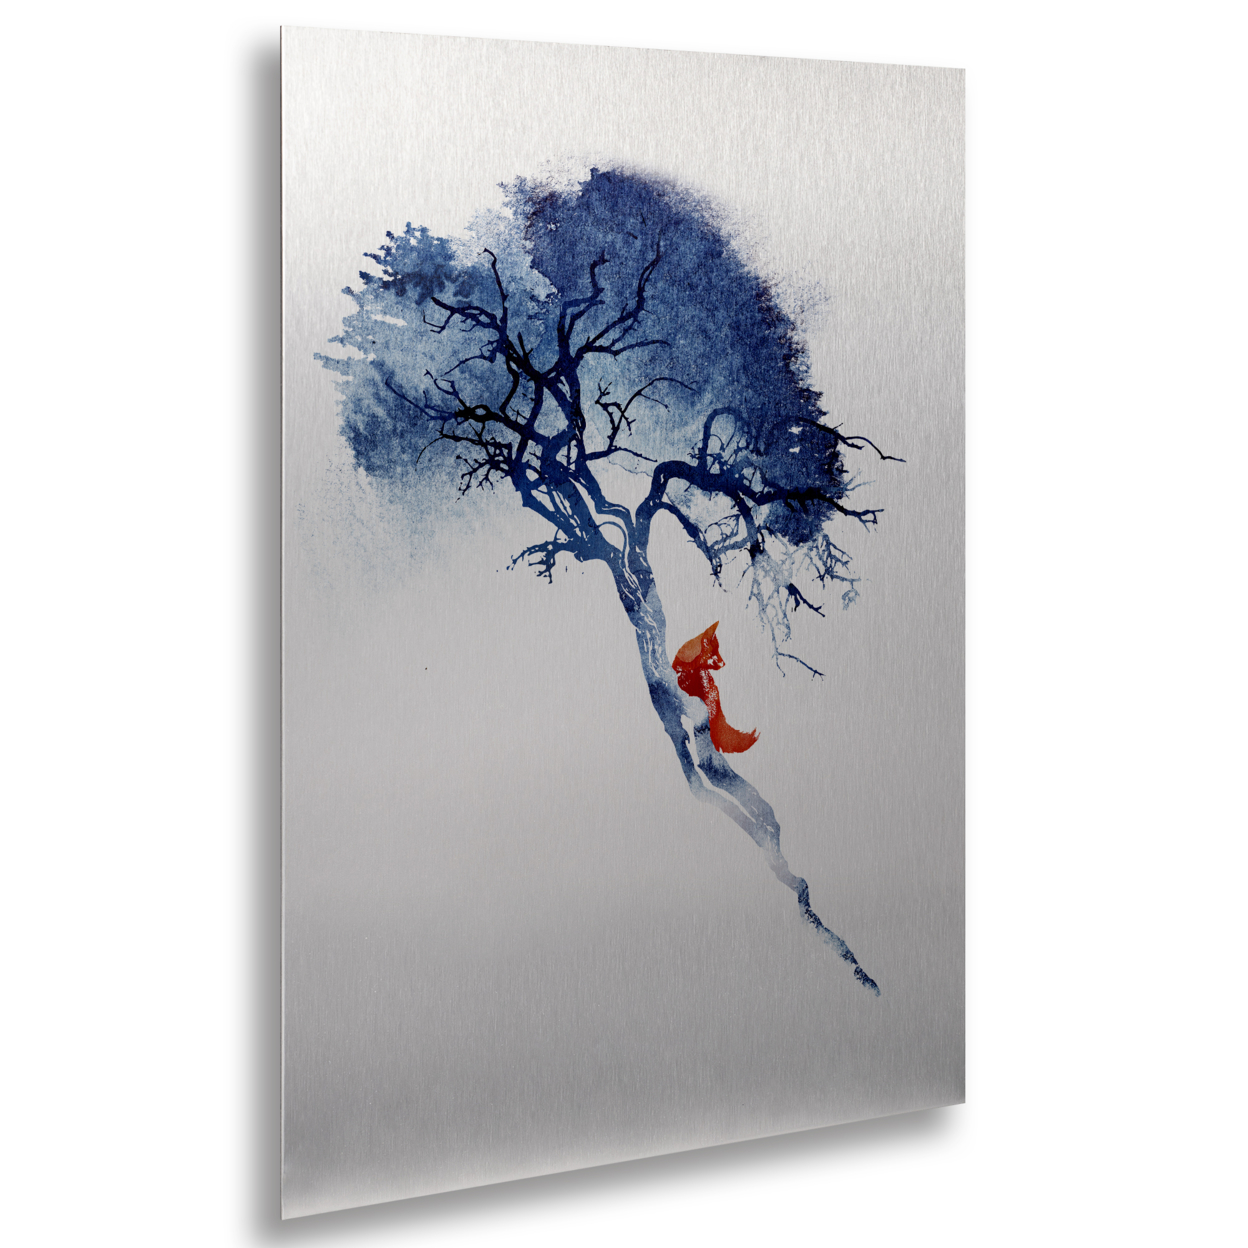 Robert Farkas 'There's No Way Back' Floating Brushed Aluminum Art 16 X 22